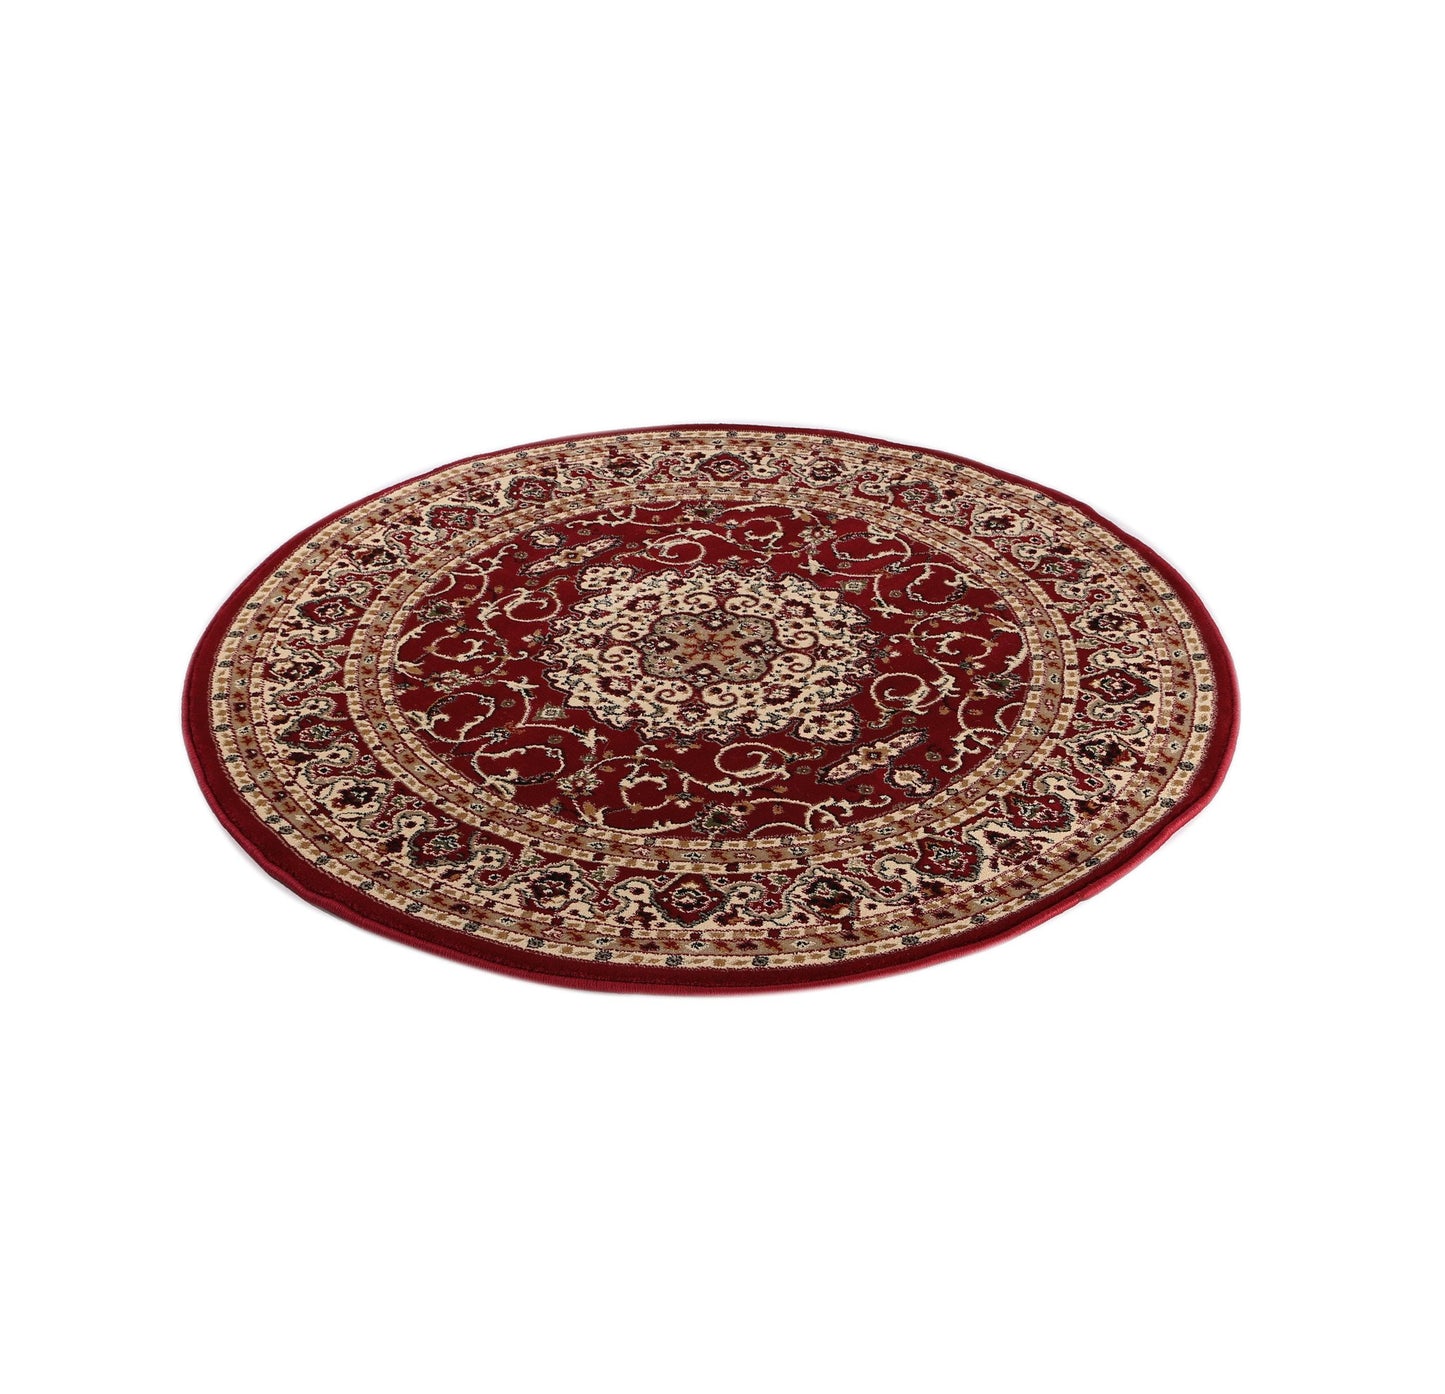 Julian Ornate Red Bordered Traditional Flowered Rug